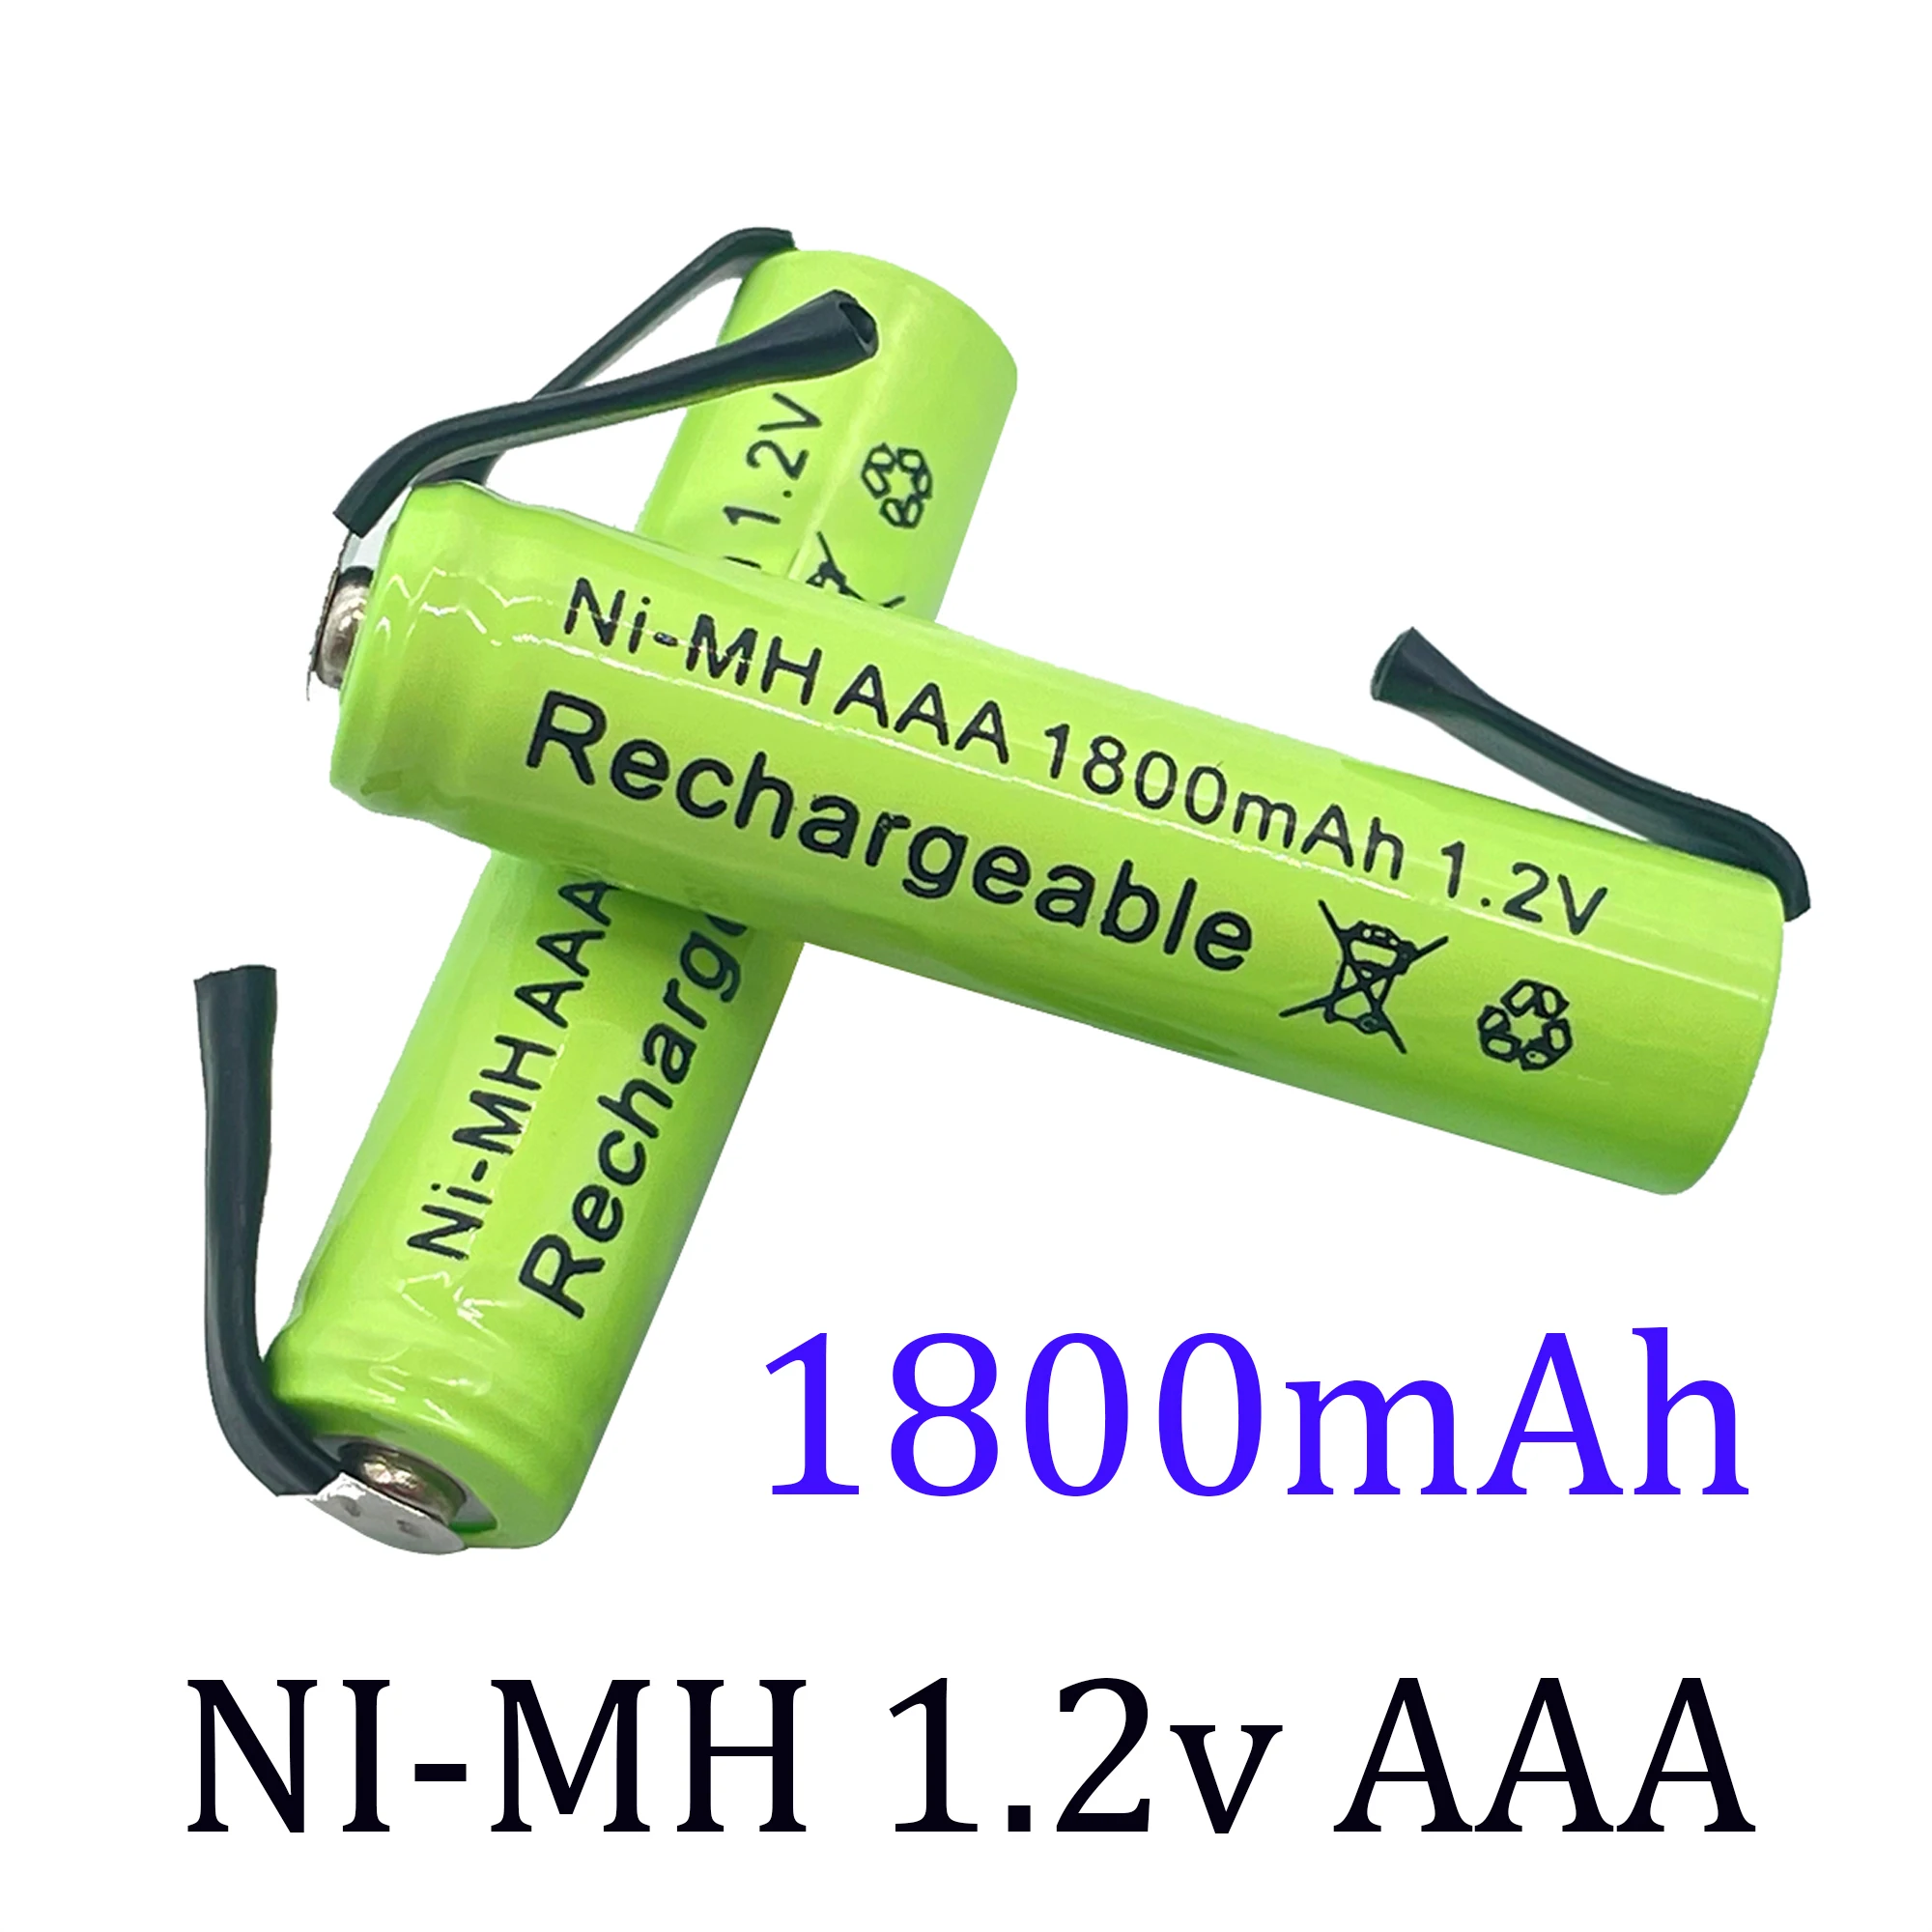 

New 1.2V AAA Ni-MH Rechargeable Battery Cell, 1800mah, with Solder Tabs for Philips Braun Electric Shaver, Razor,Toothbrush